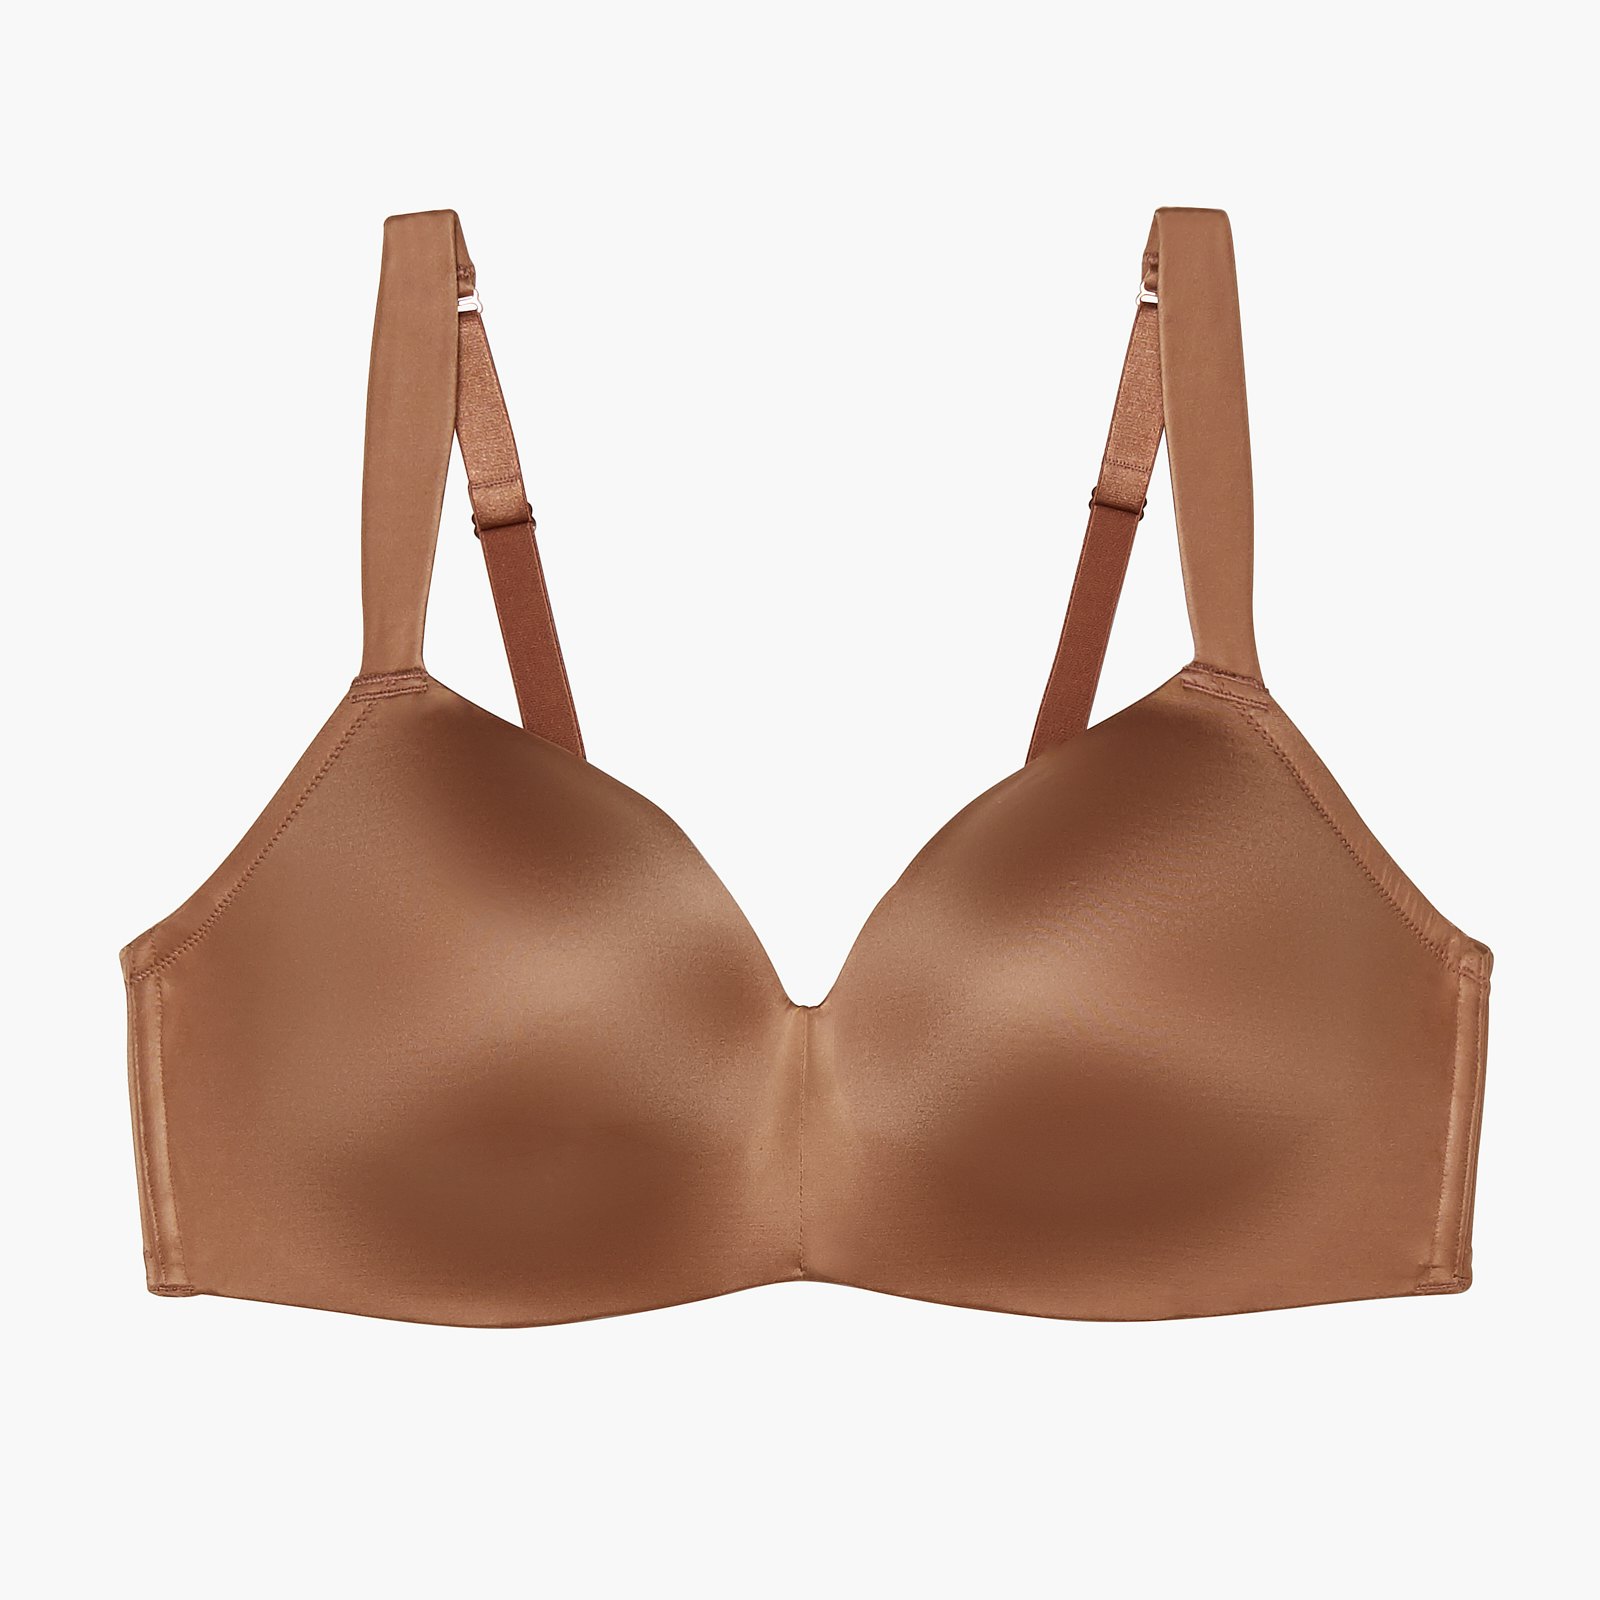 Savage X Fenty Convertible & Strapless Bras Are FINALLY Here For